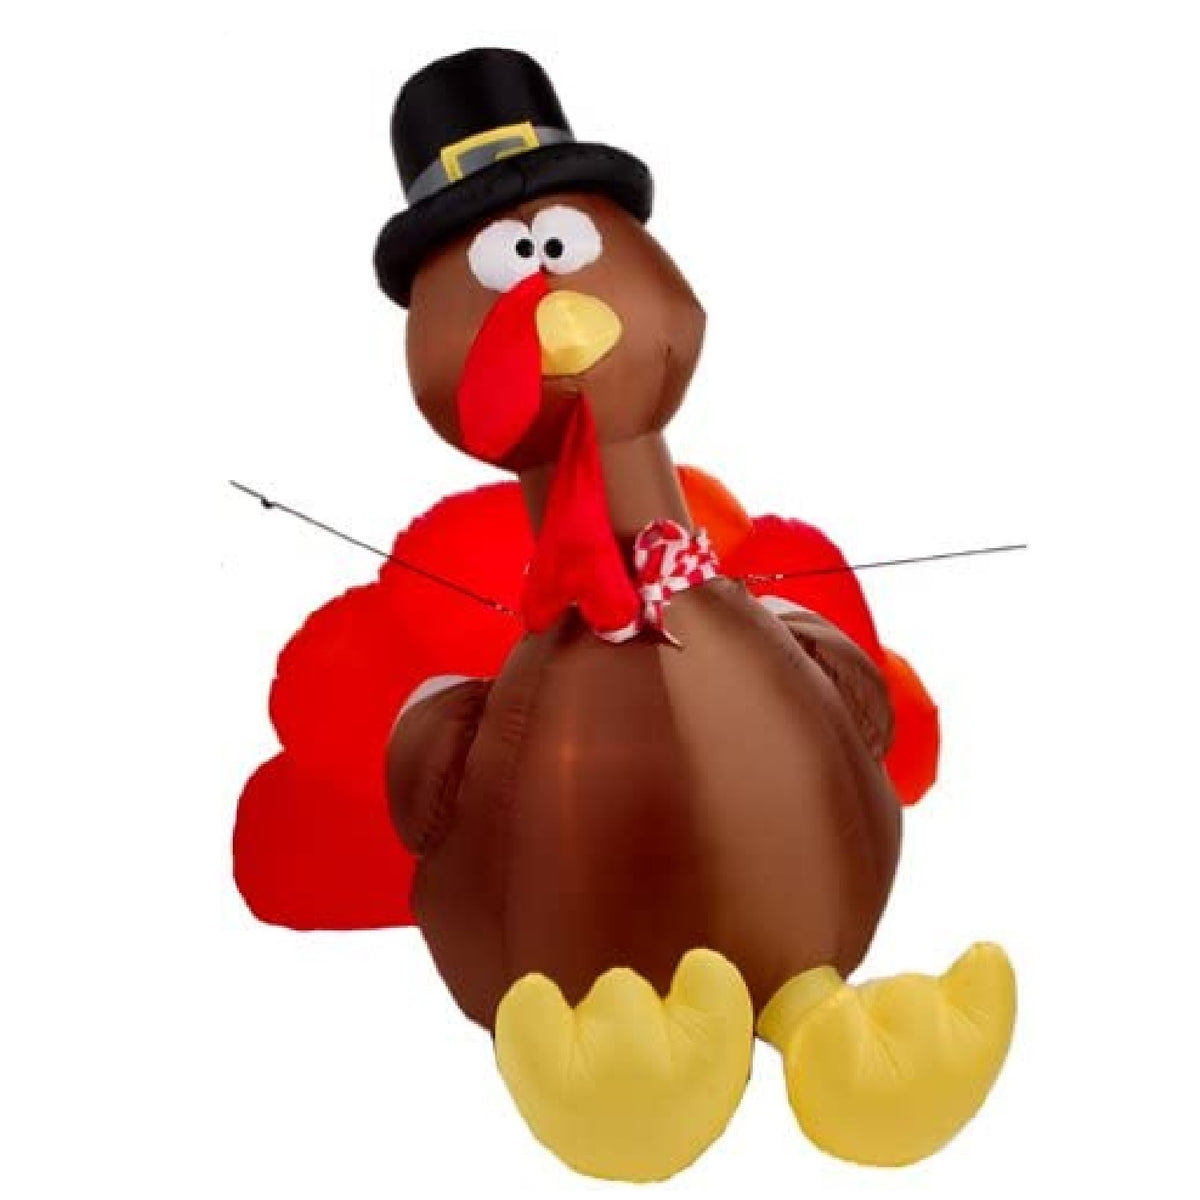 Airblown Thanksgiving Inflatable Turkey on sale, holiday gift items at ...